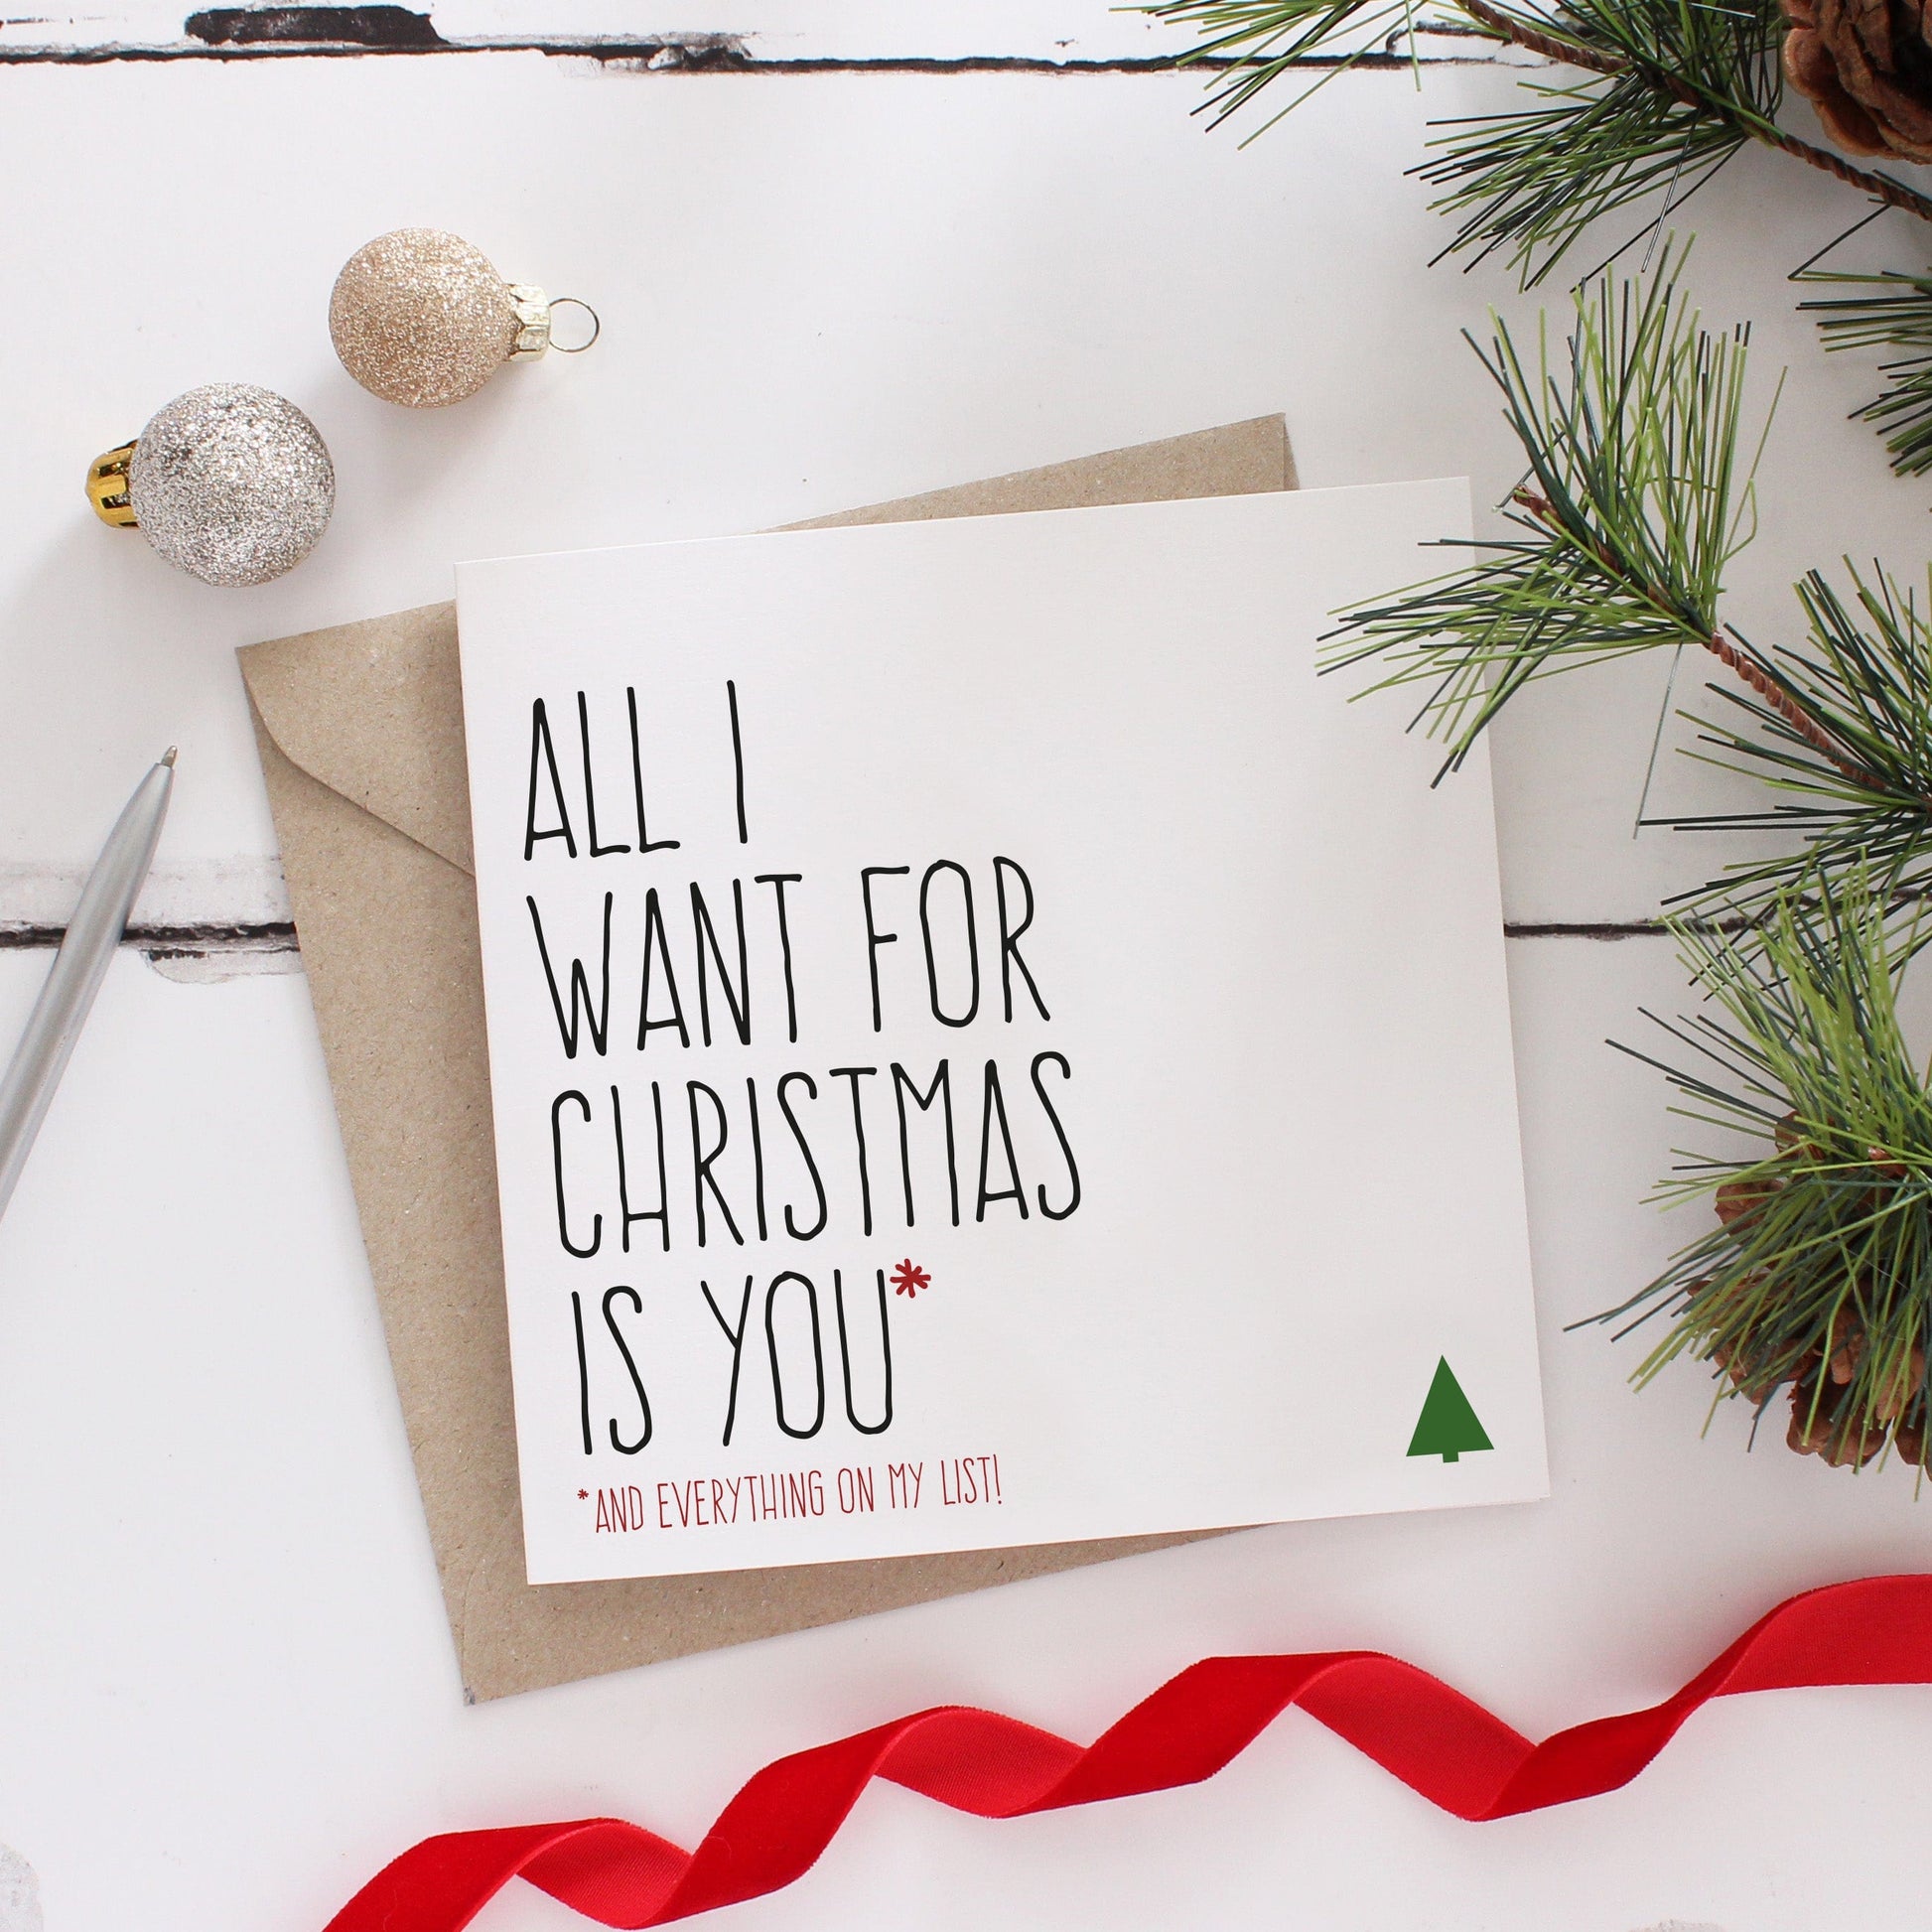 All I want for Christmas is you Christmas card from Purple Tree Designs